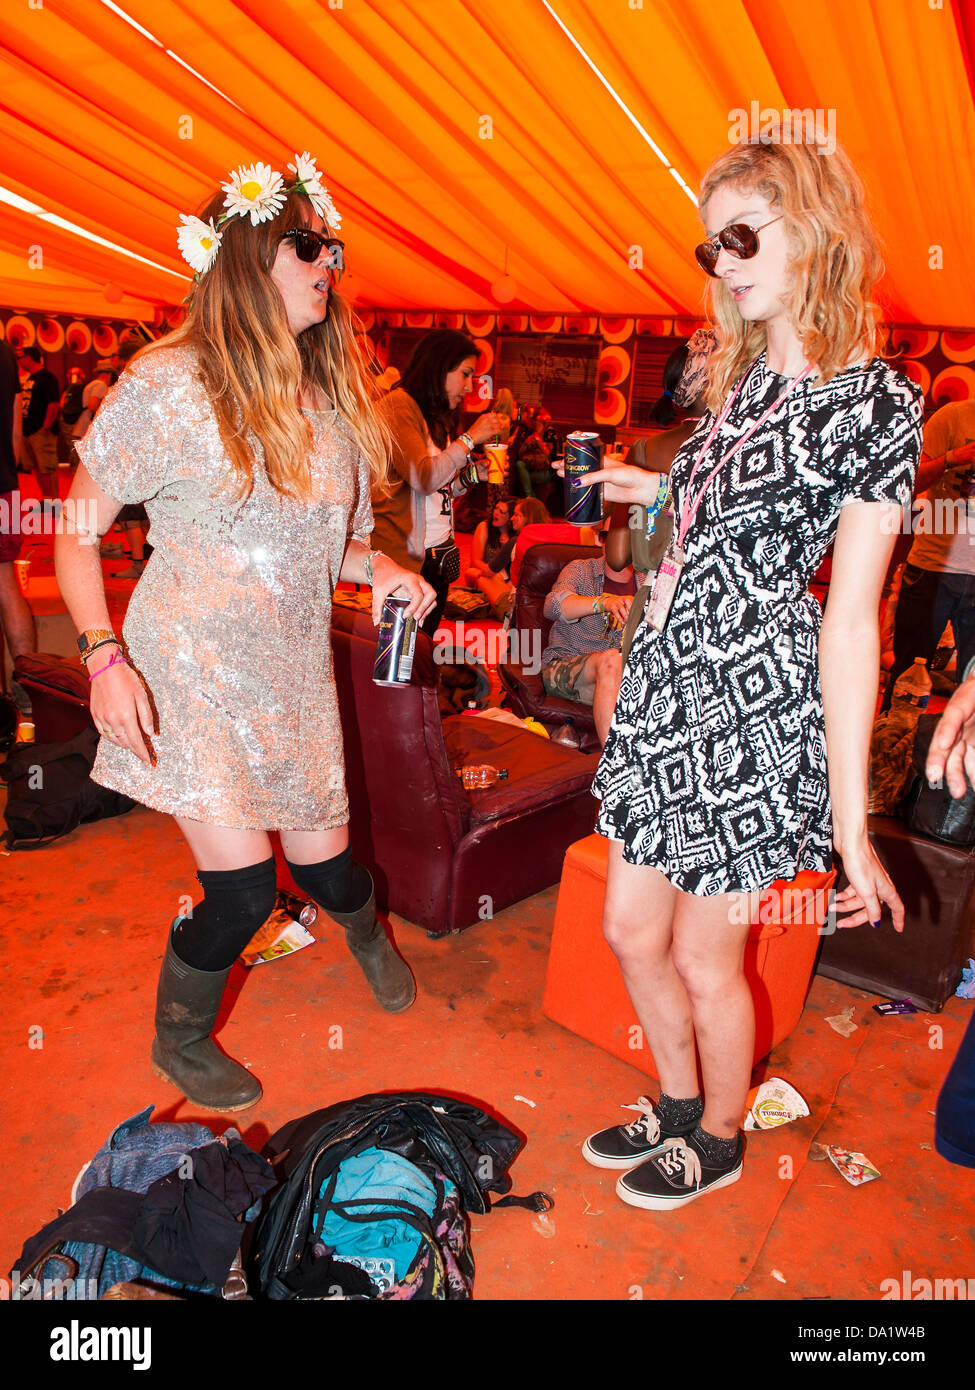 Dancing at lunchtime in the orange tent of the Beat Hotel. The 2013 Glastonbury Festival, Worthy Farm, Glastonbury. 30 June 2013 Stock Photo